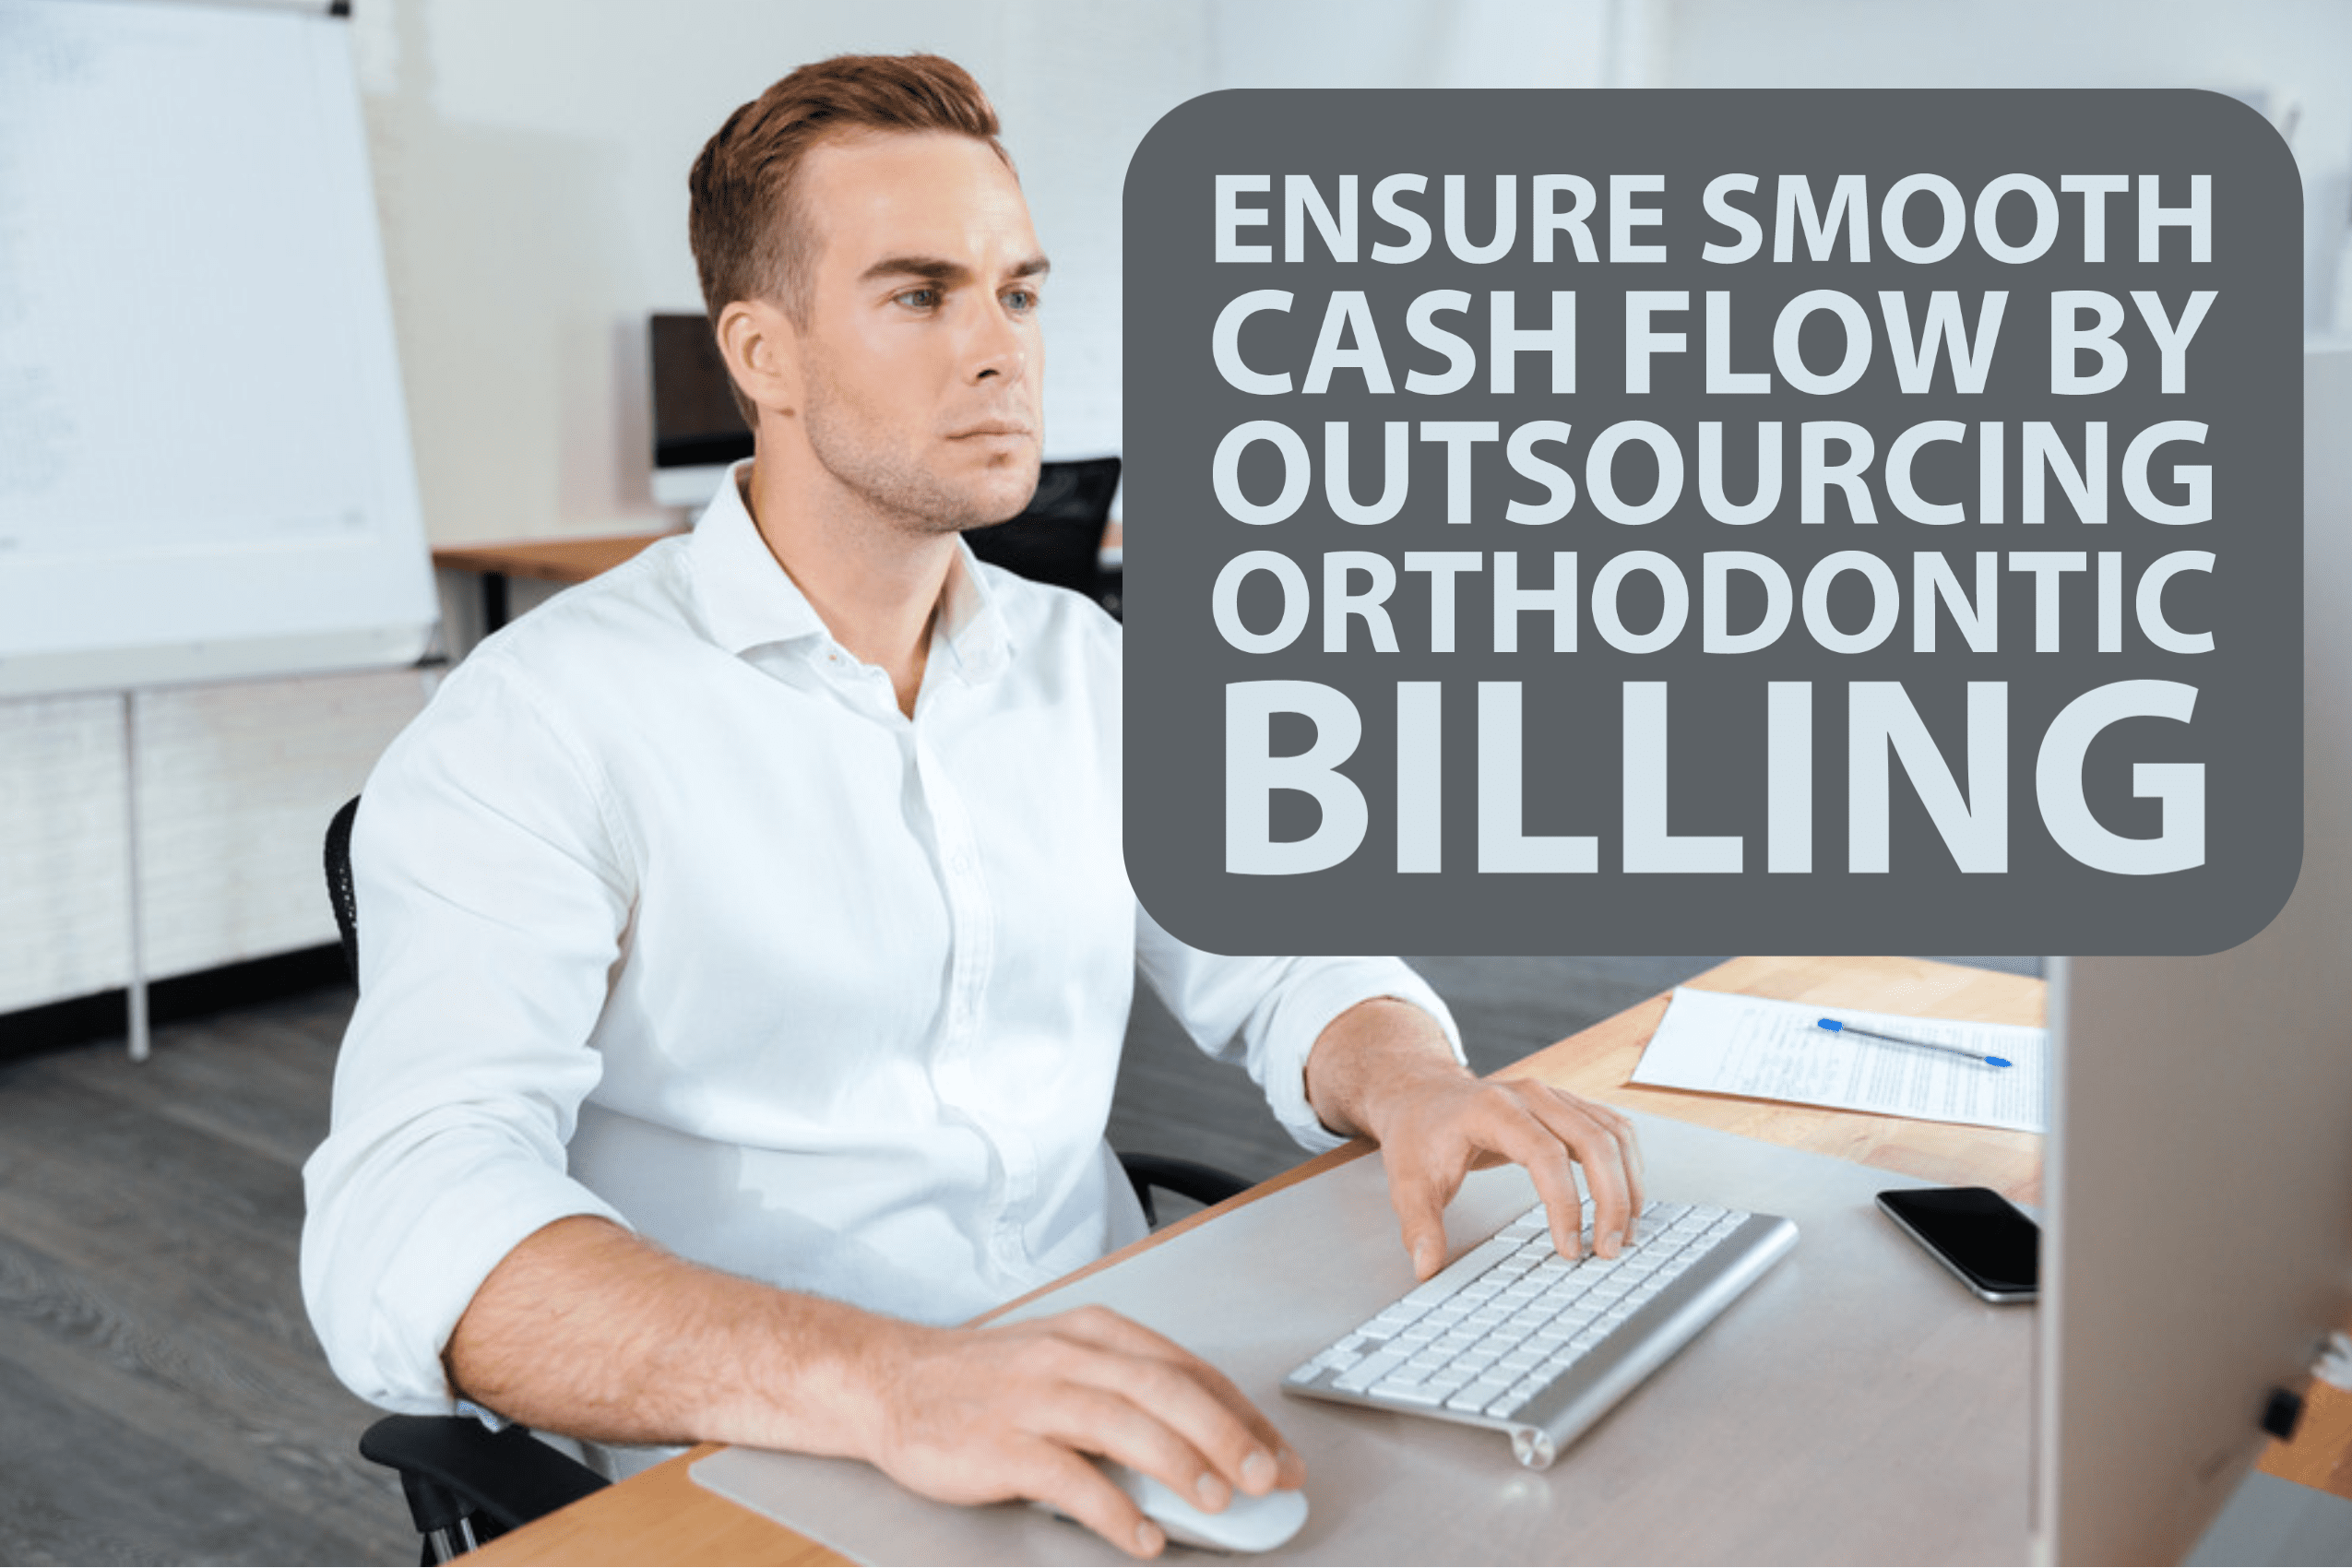 Ensure Smooth Cash Flow by Outsourcing Orthodontic Billing